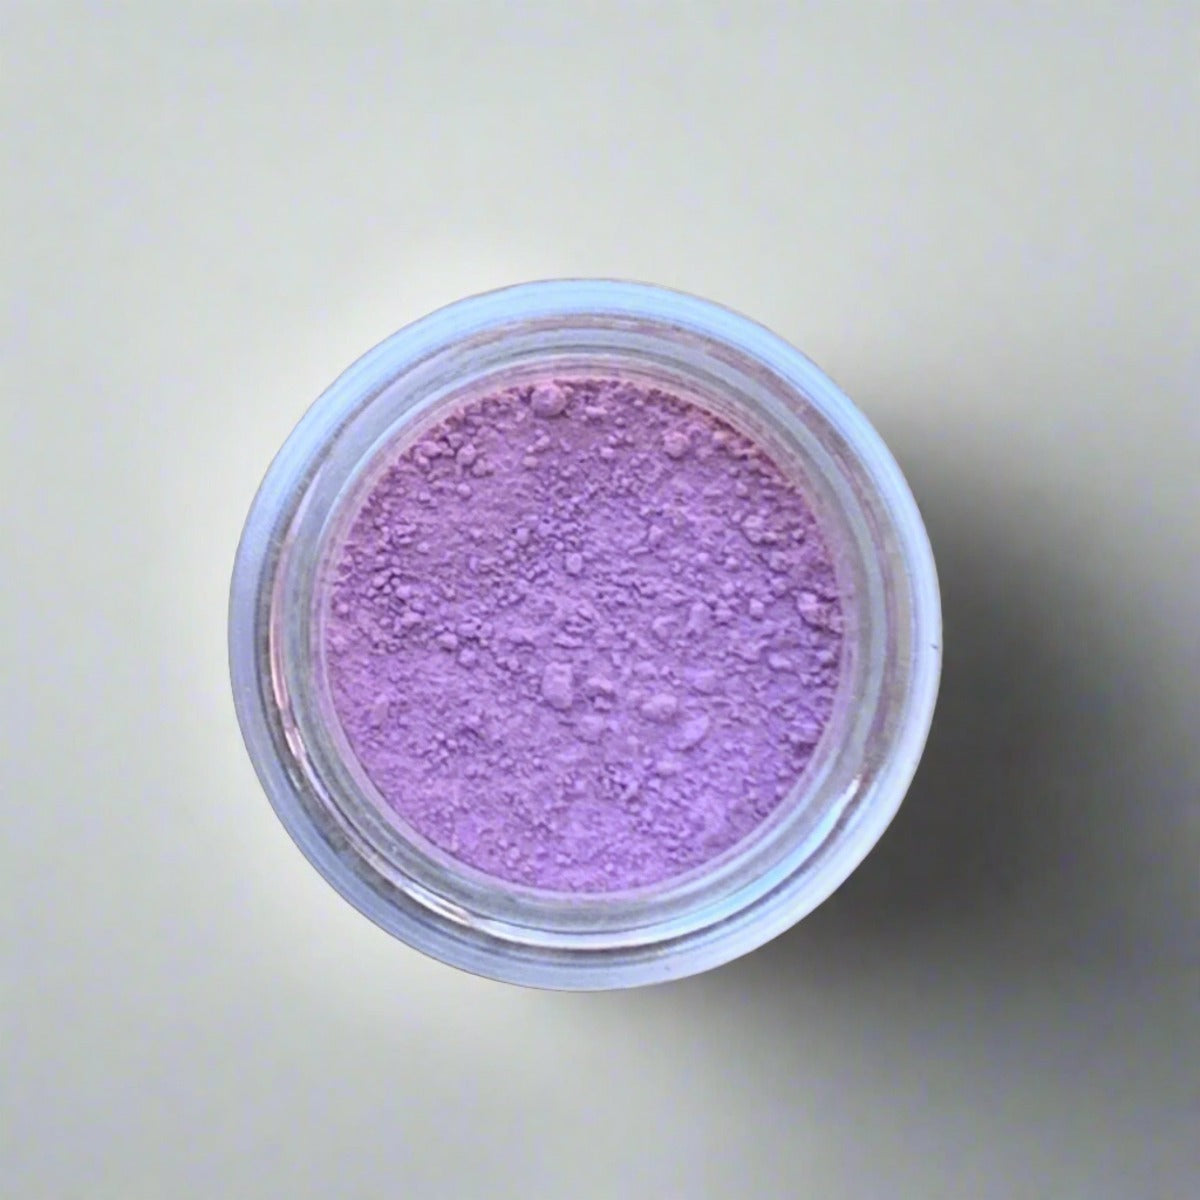 Cosmetic jar of Barrier Reef Eyeshadow: A vibrant pink shade, perfect for adding a pop of color to your eye makeup looks